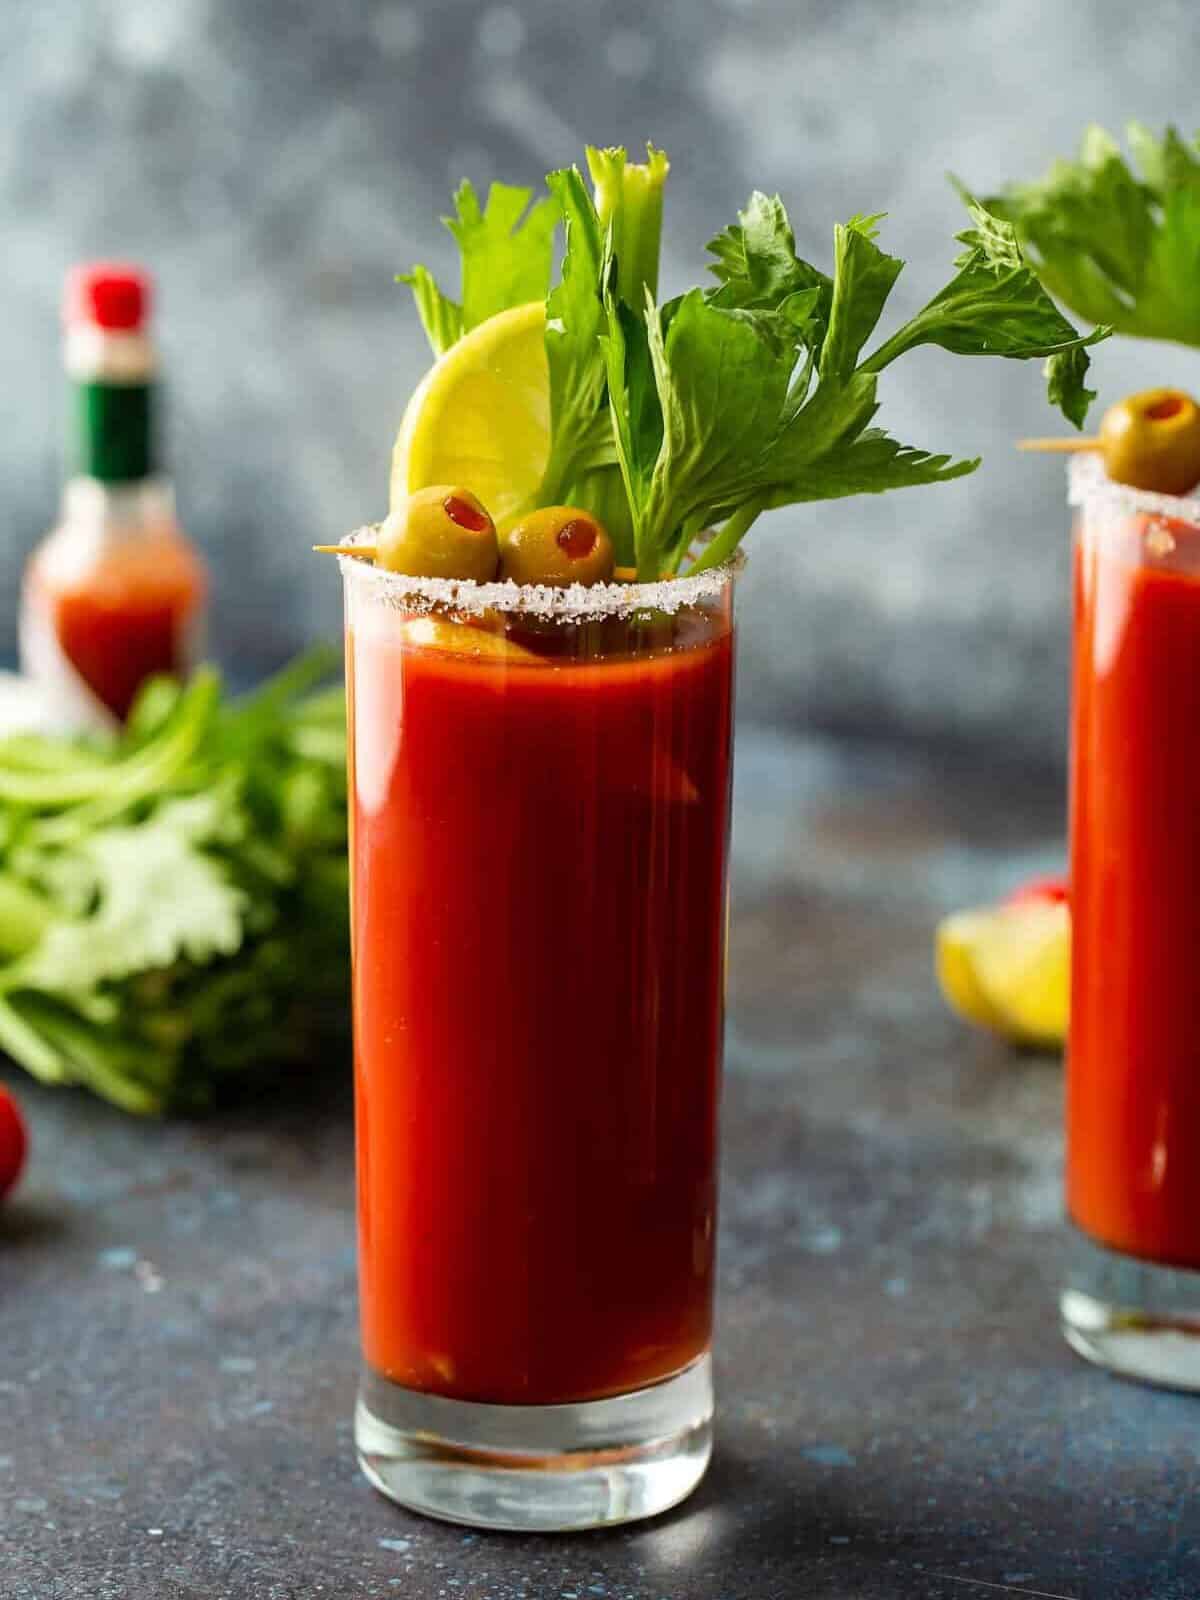 A classic Bloody Mary